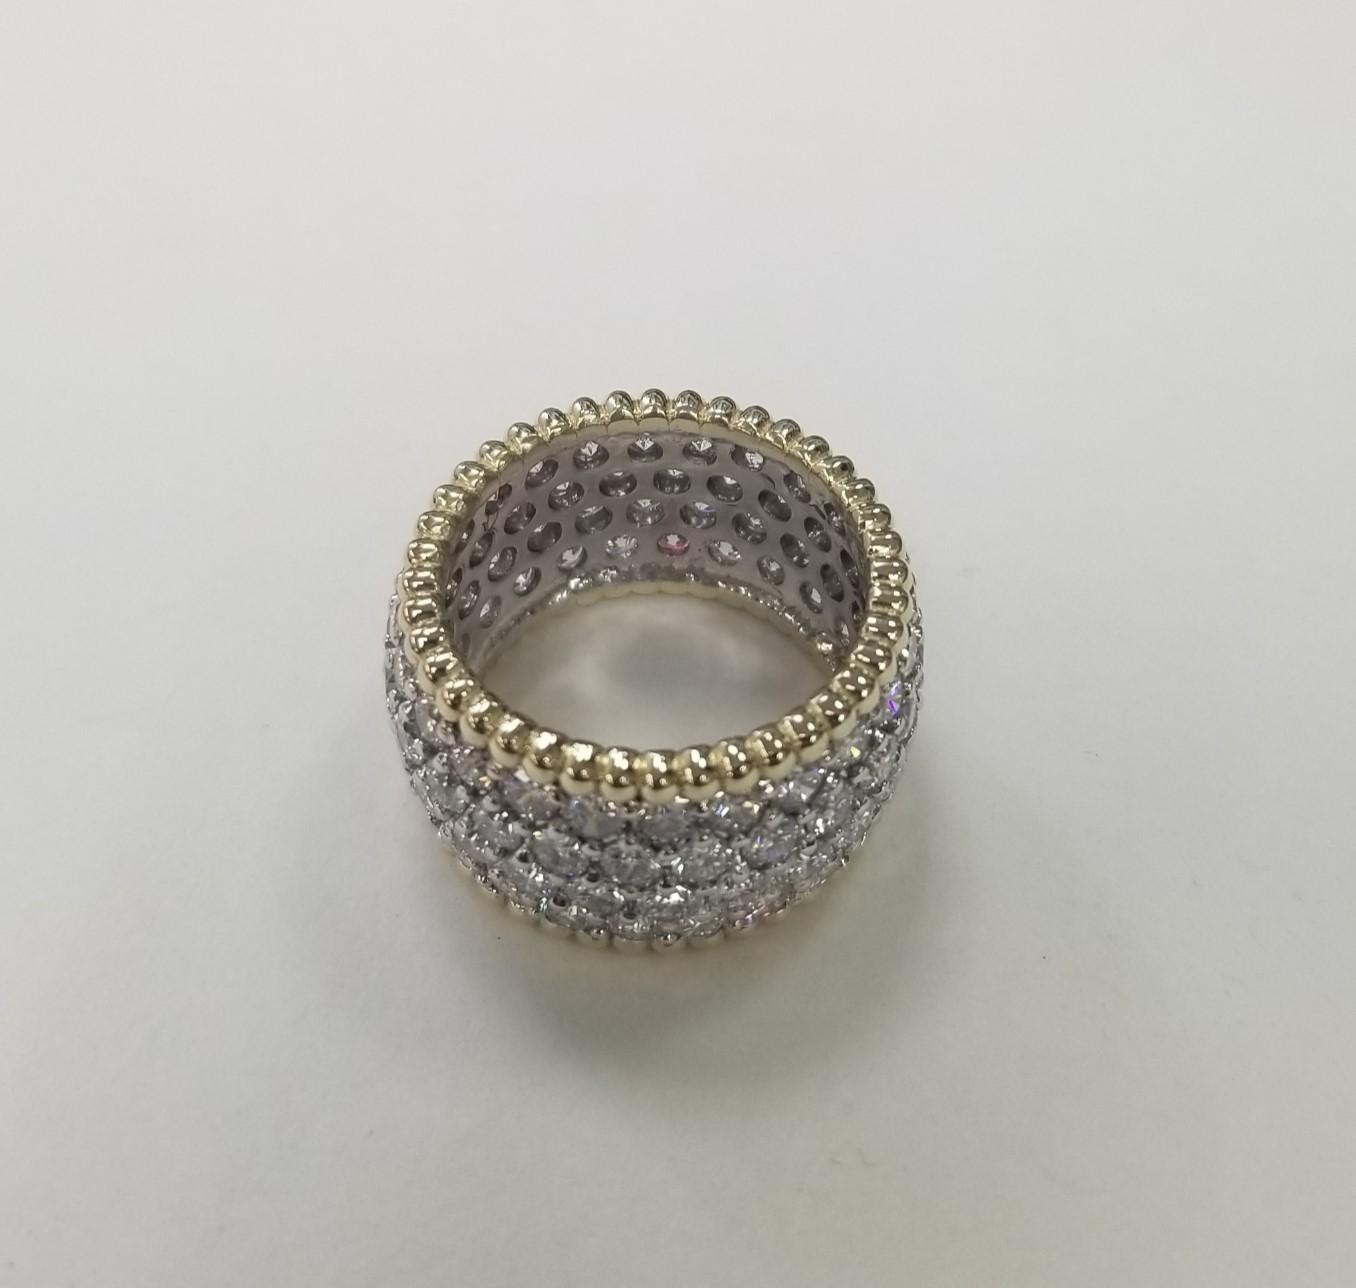 14k 2 tone gold 4 row set diamond eternity ring containing 96 round full cut diamonds of very fine quality weighing 7.03cts, ring size is a 7.5 but can be made to fit.
Specifications:
Metal: 14K White and Yellow Gold
Center Stone: 96 Diamonds 7.03